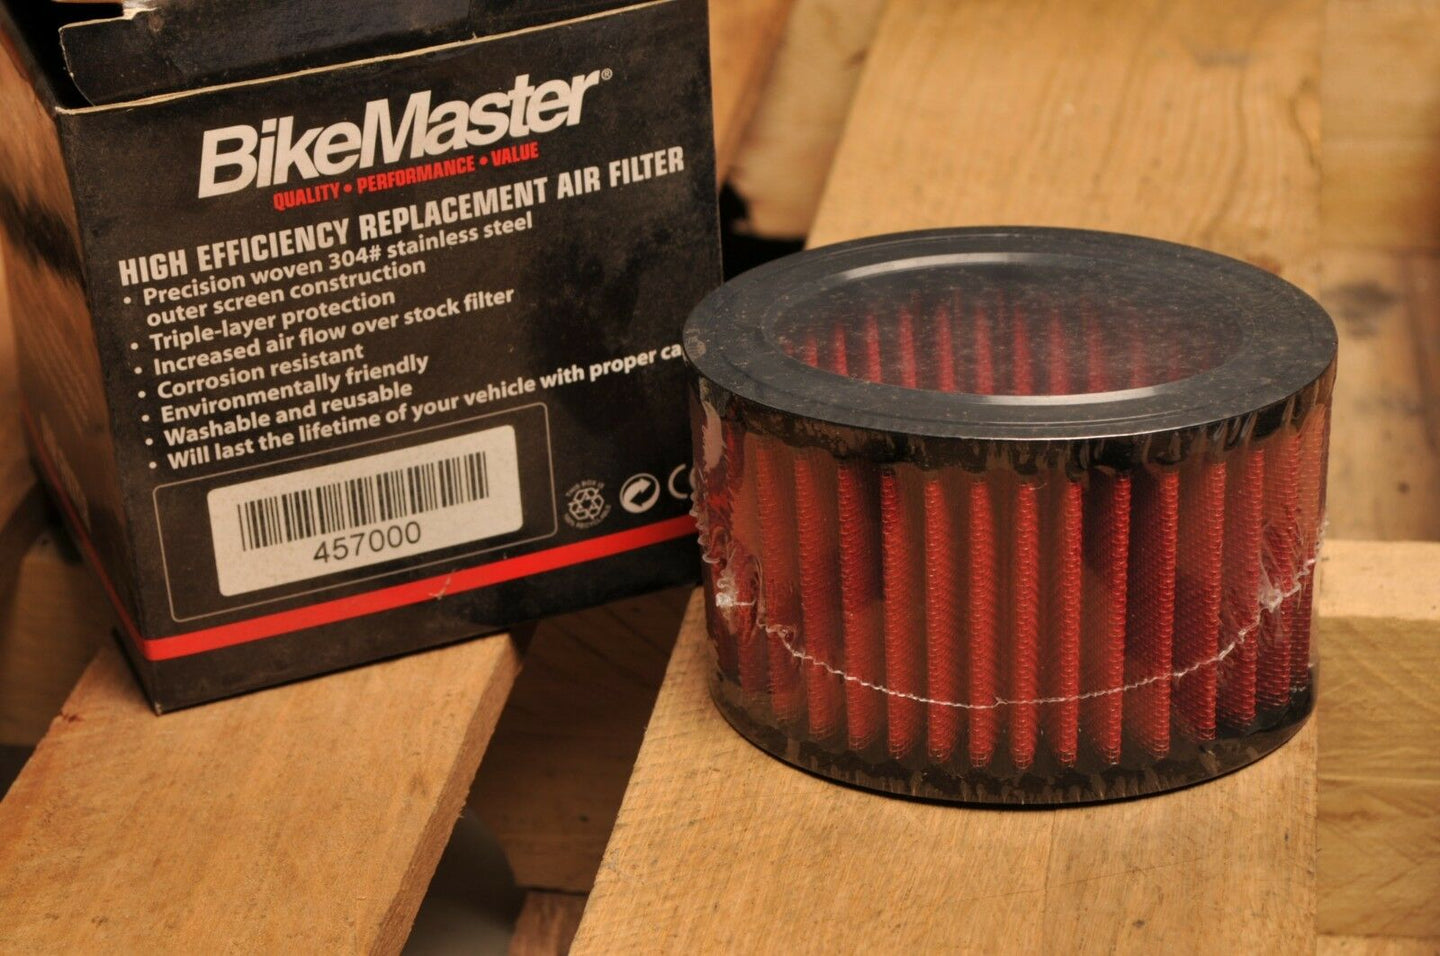 BIKEMASTER HIGH EFFICIENCY REPLACEMENT AIR FILTER 457000 - BMW MOTORCYCLE